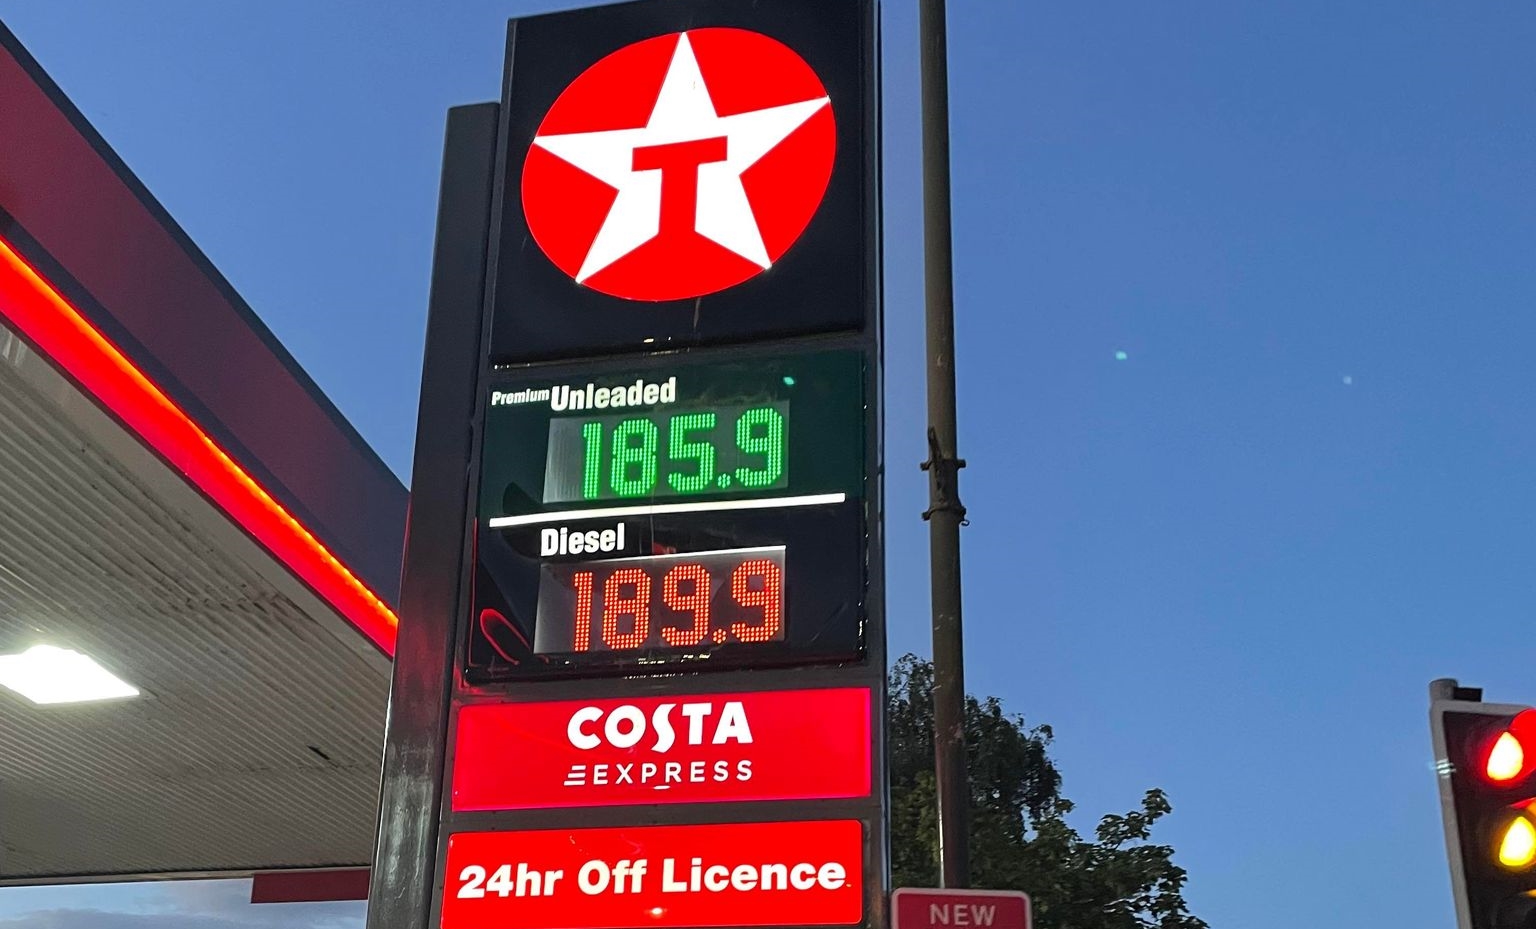 NEWS | Price of filling up average family car with petrol hits more than £100 for the first time EVER